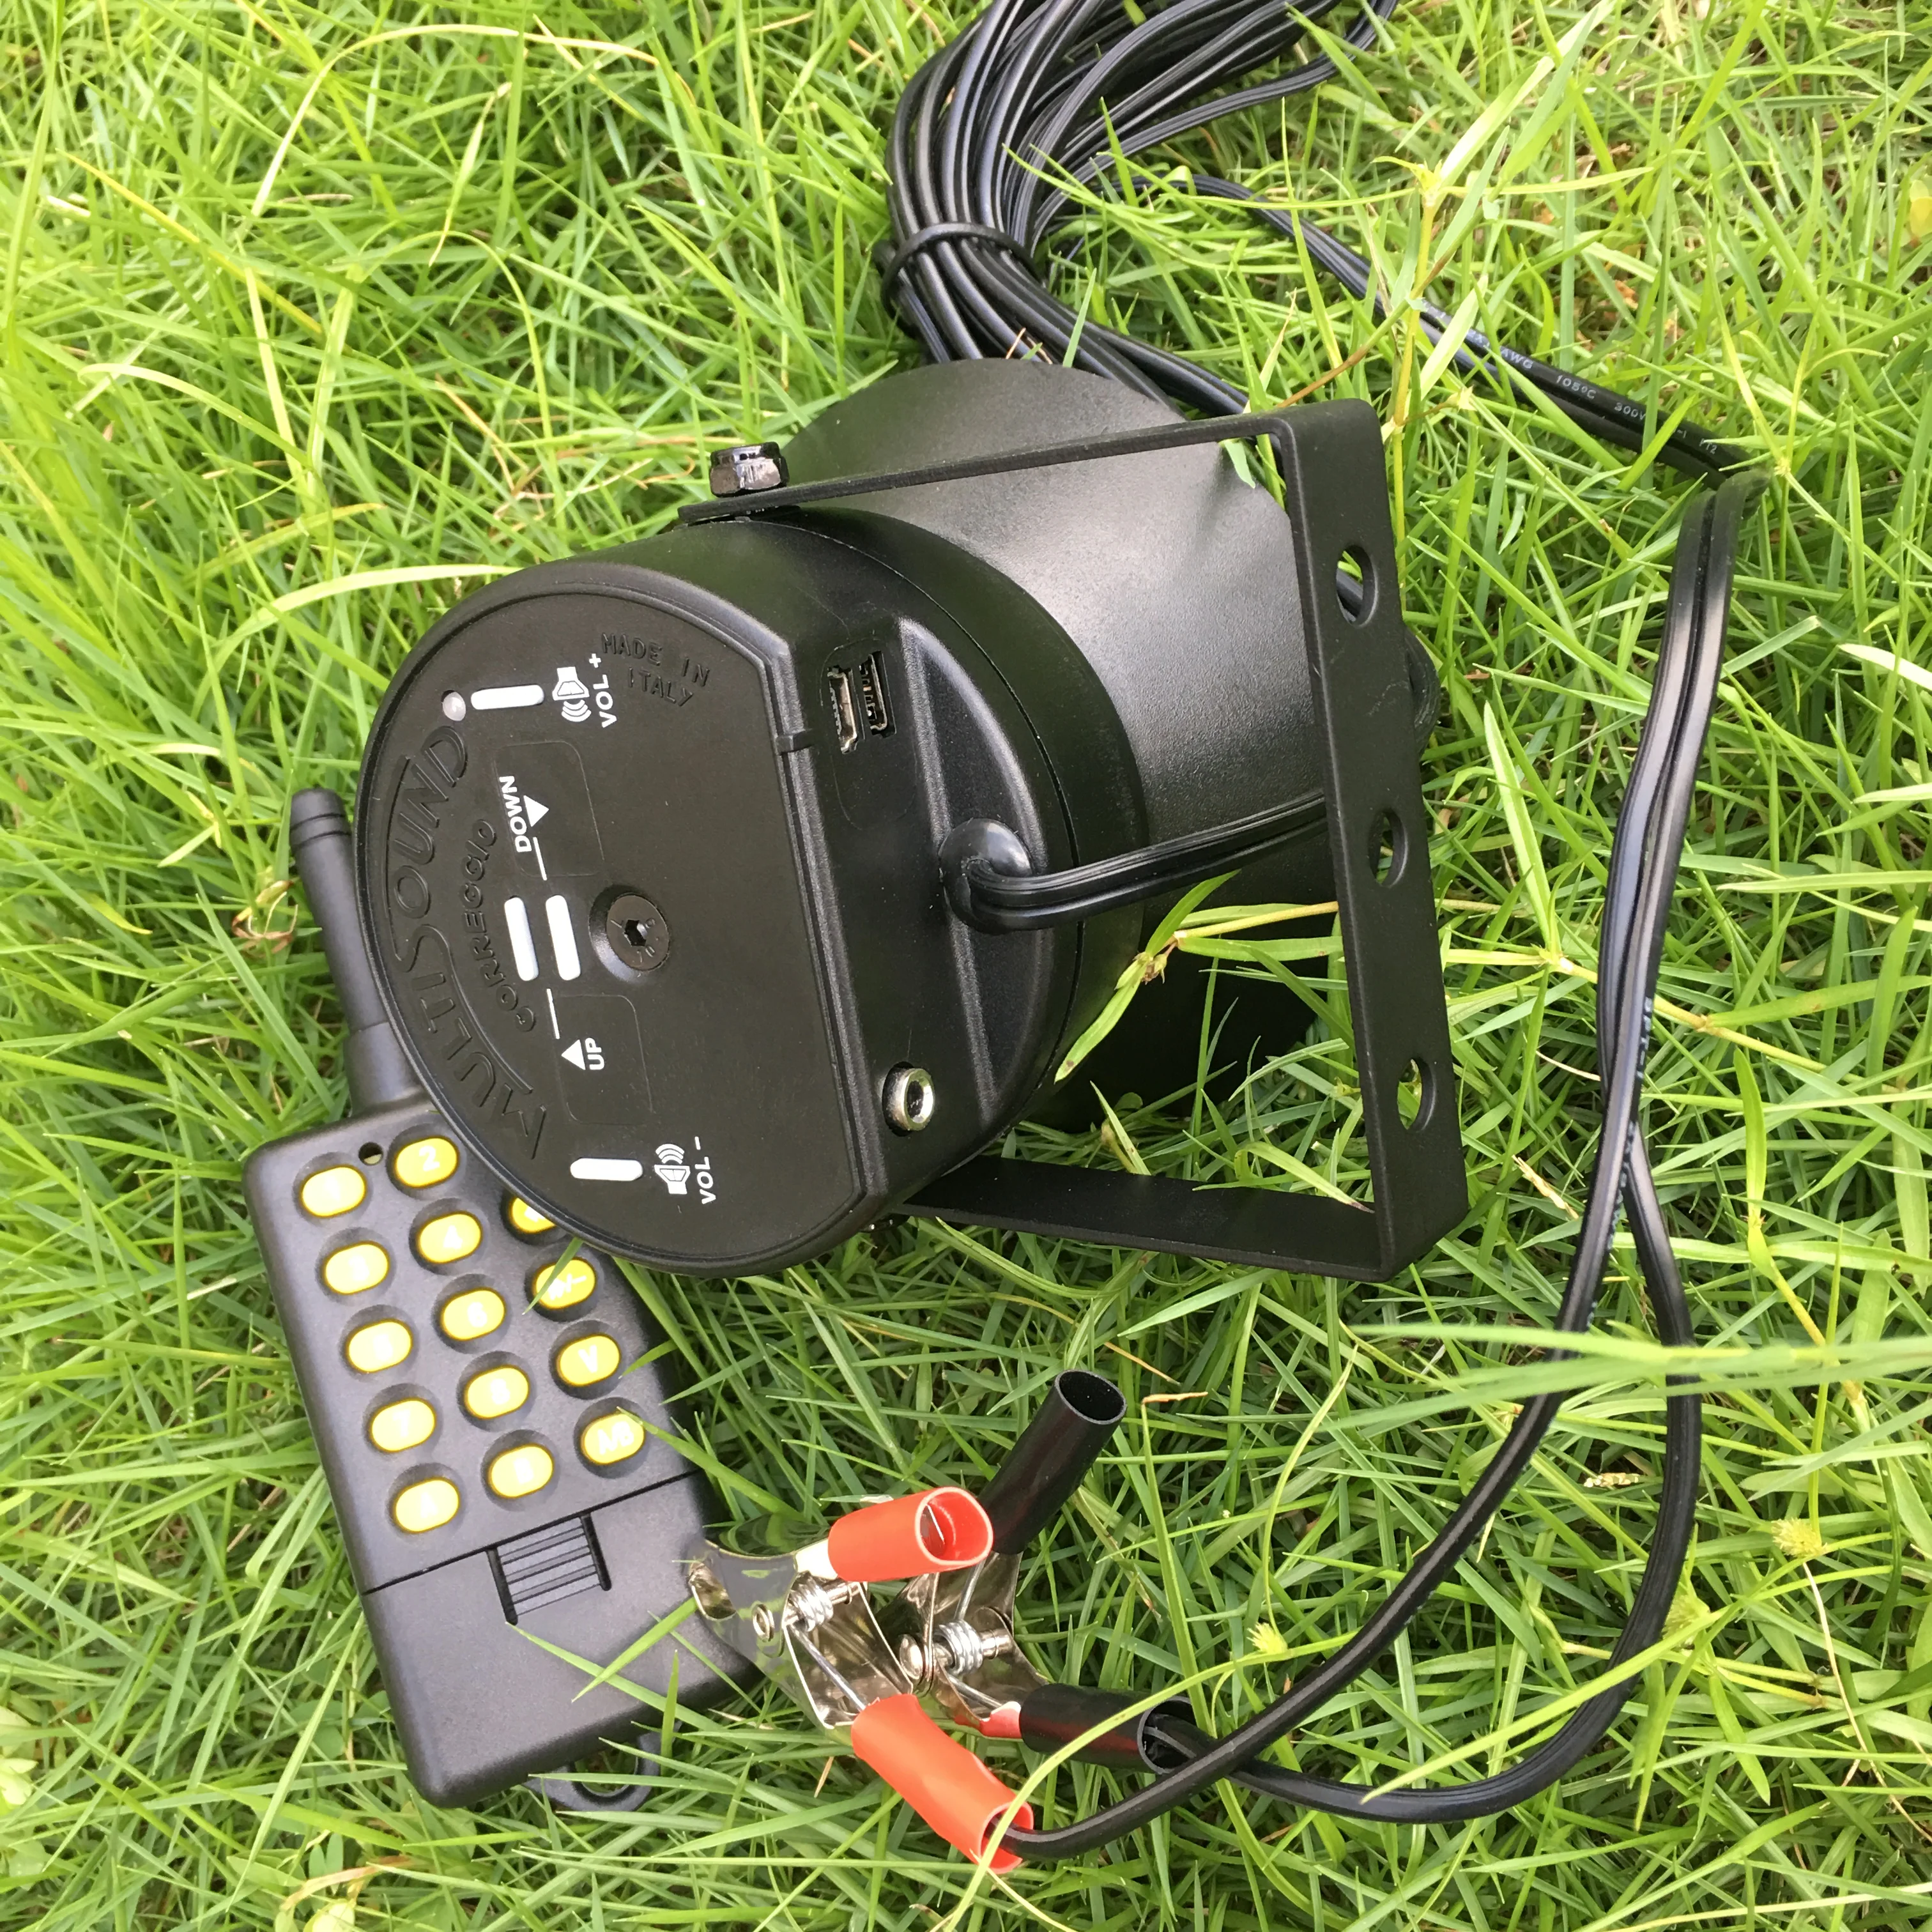 Multisounds bird caller with remote control MP3 MIX sounds  CP-395D Digital Hunting decoy device game call predator caller